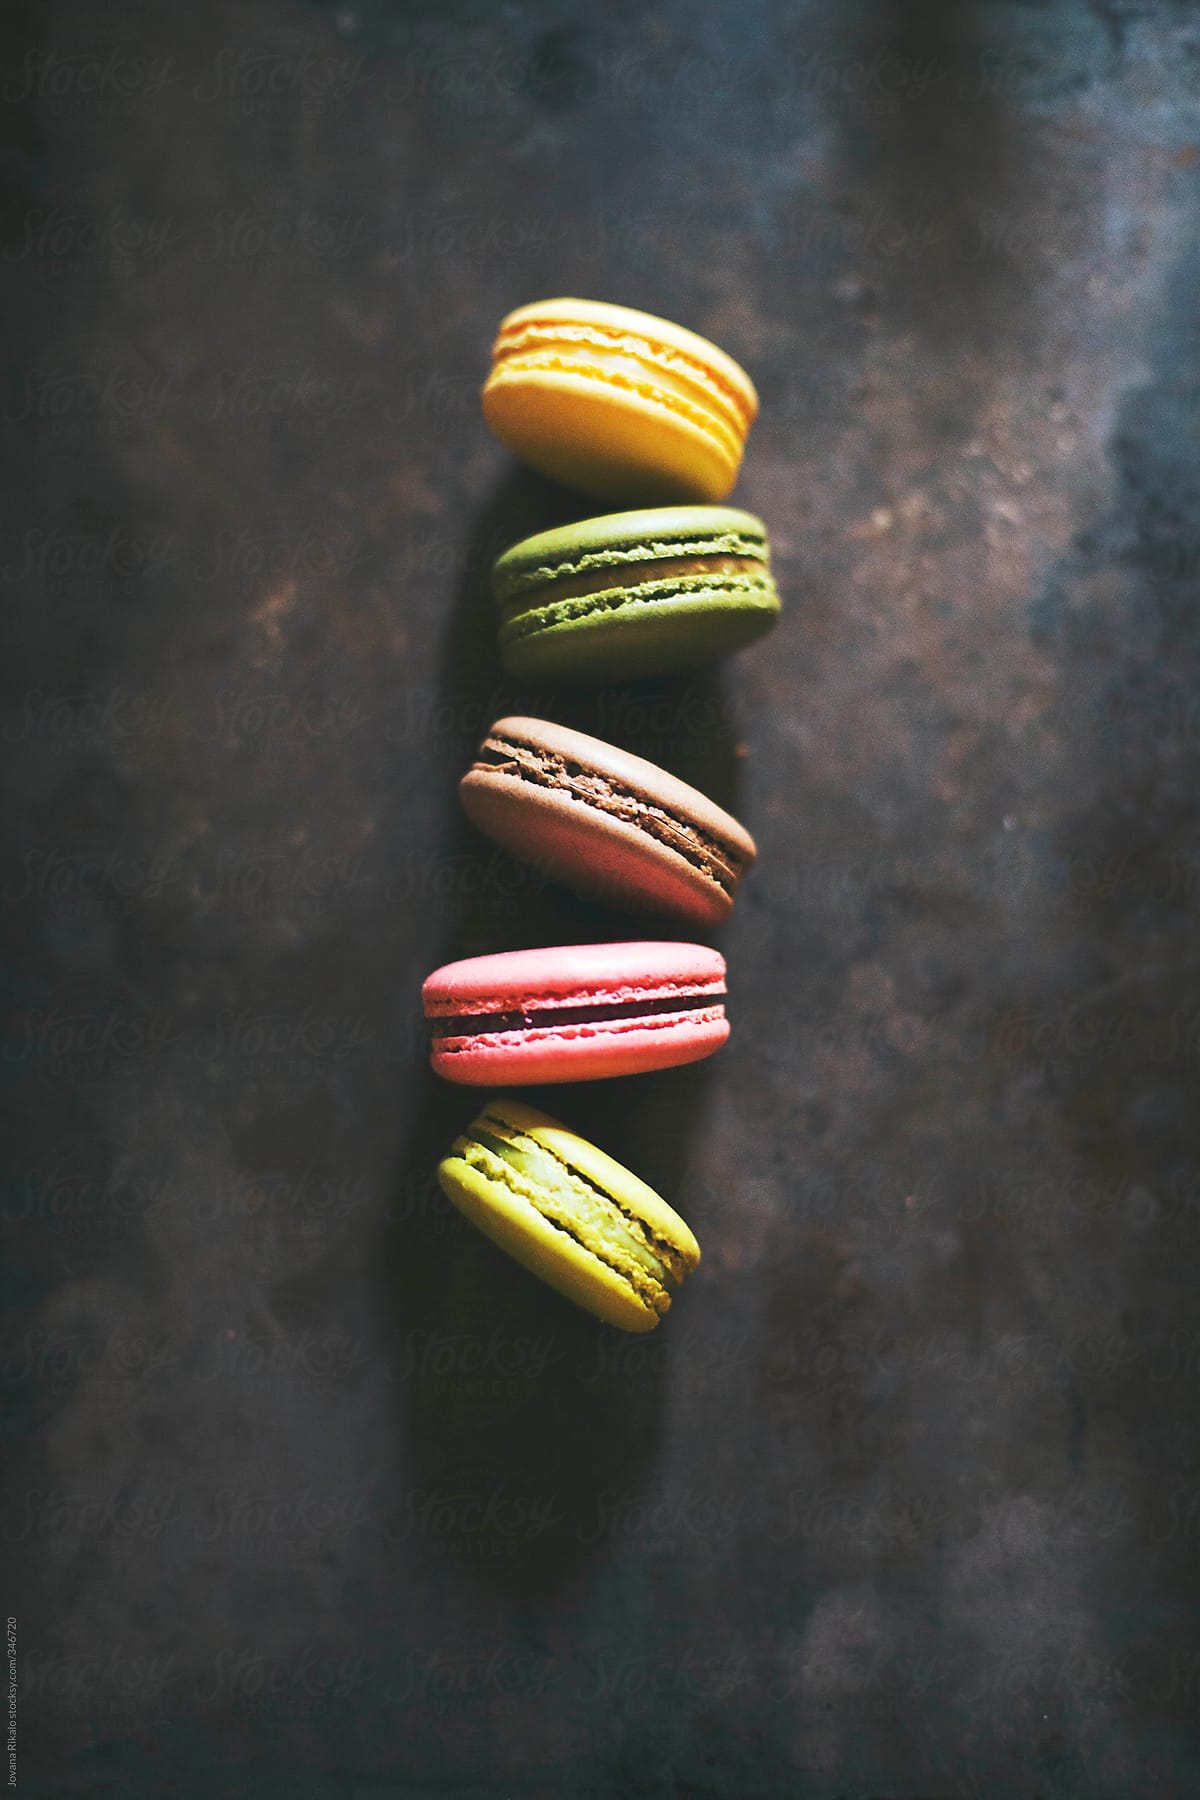 Colorful french macaroons